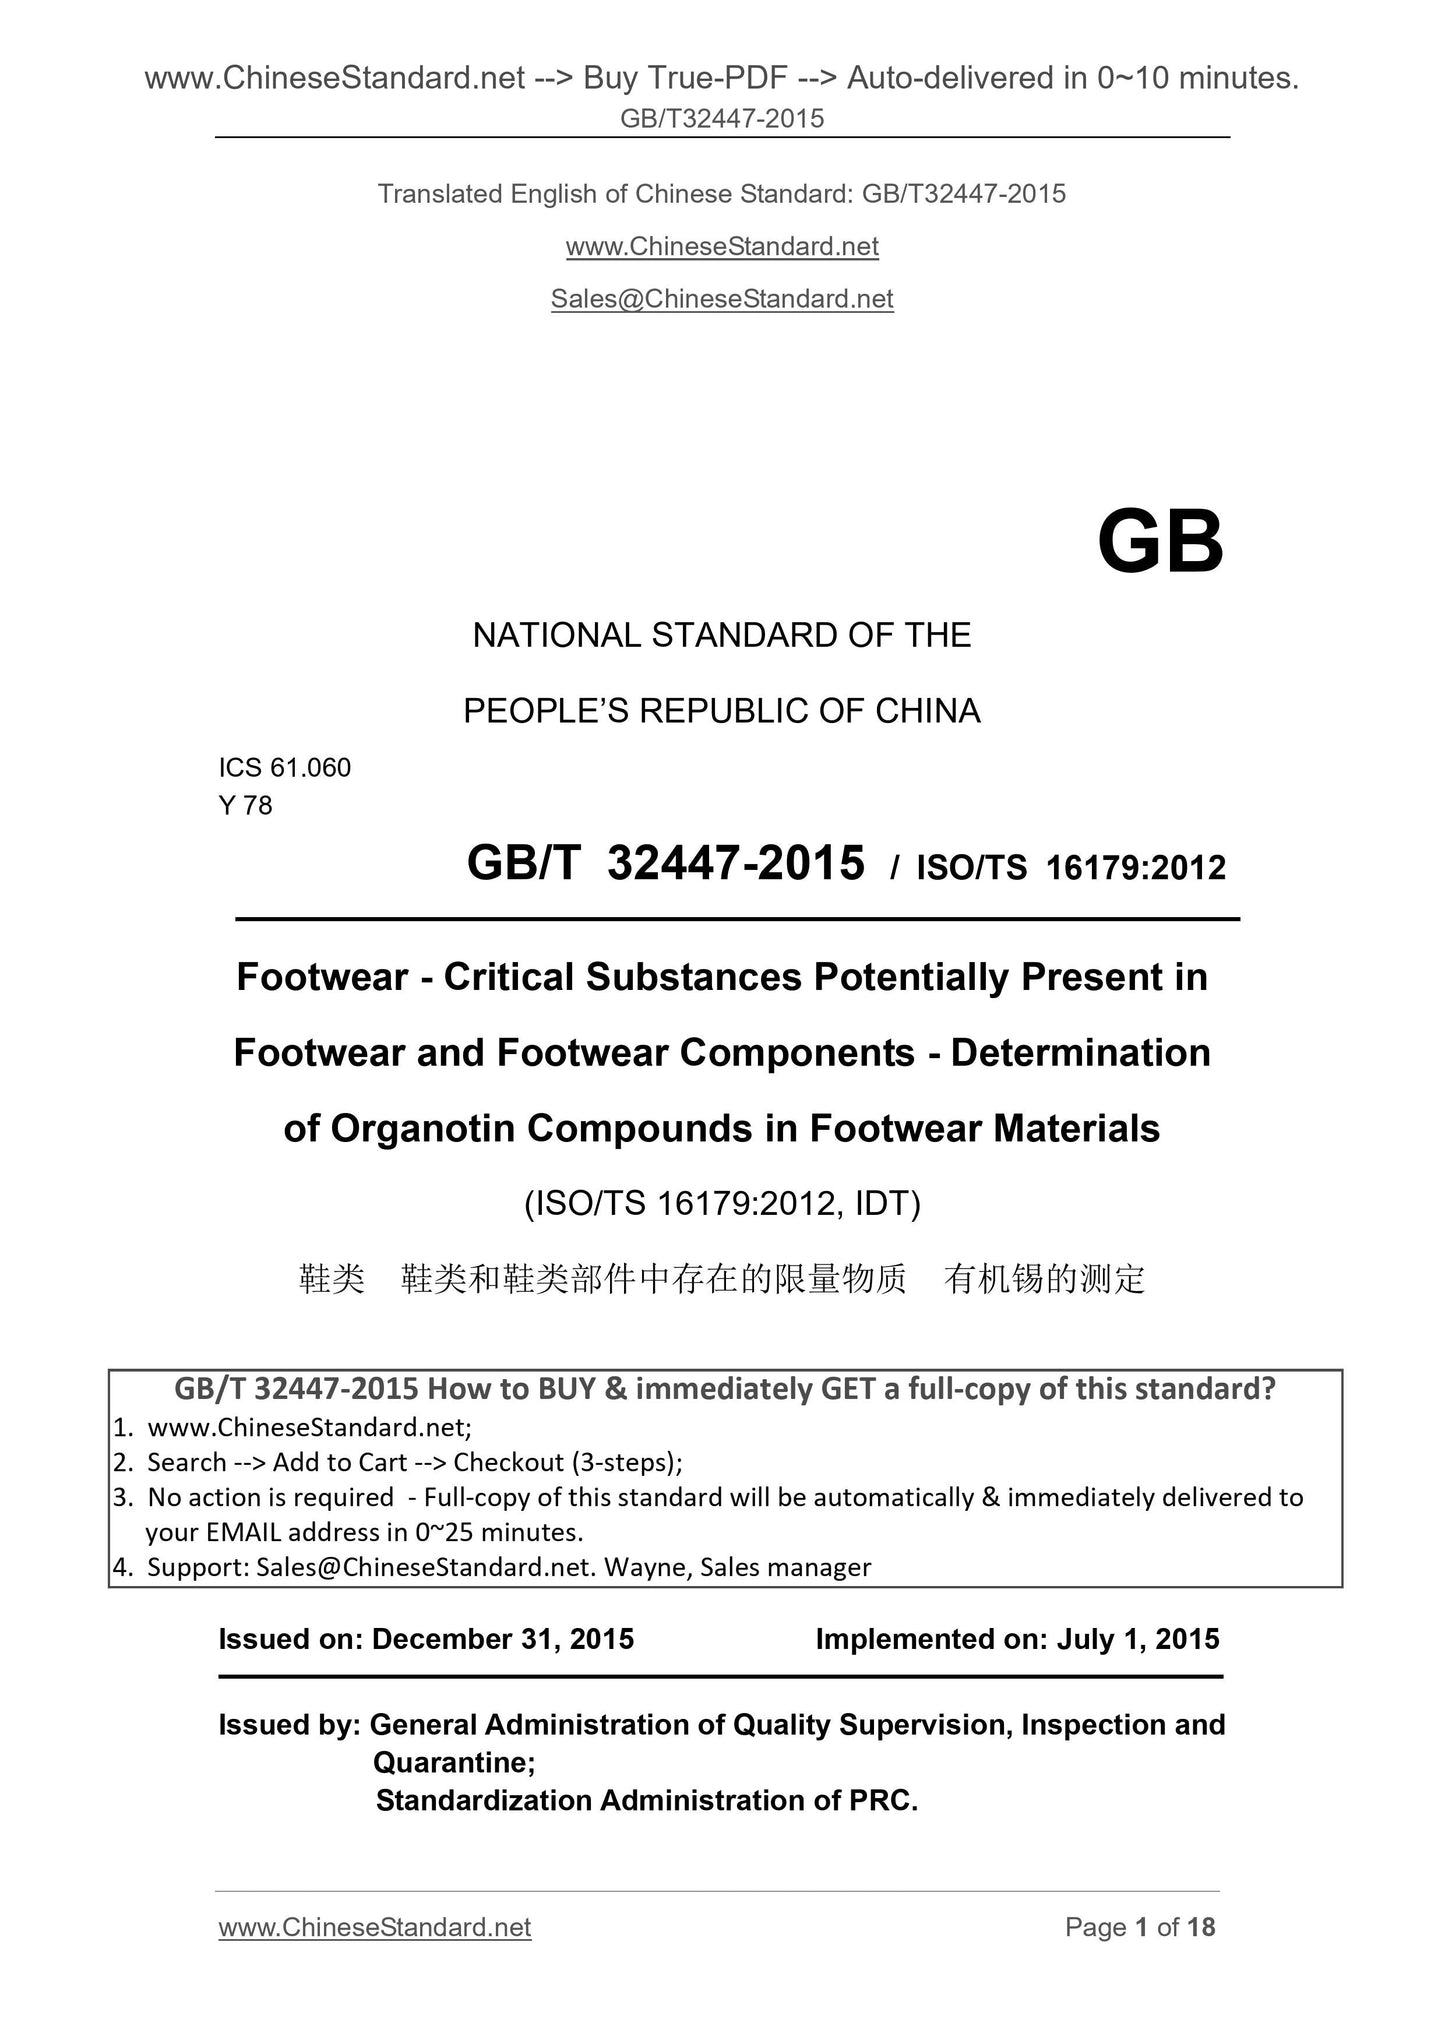 GB/T 32447-2015 Page 1